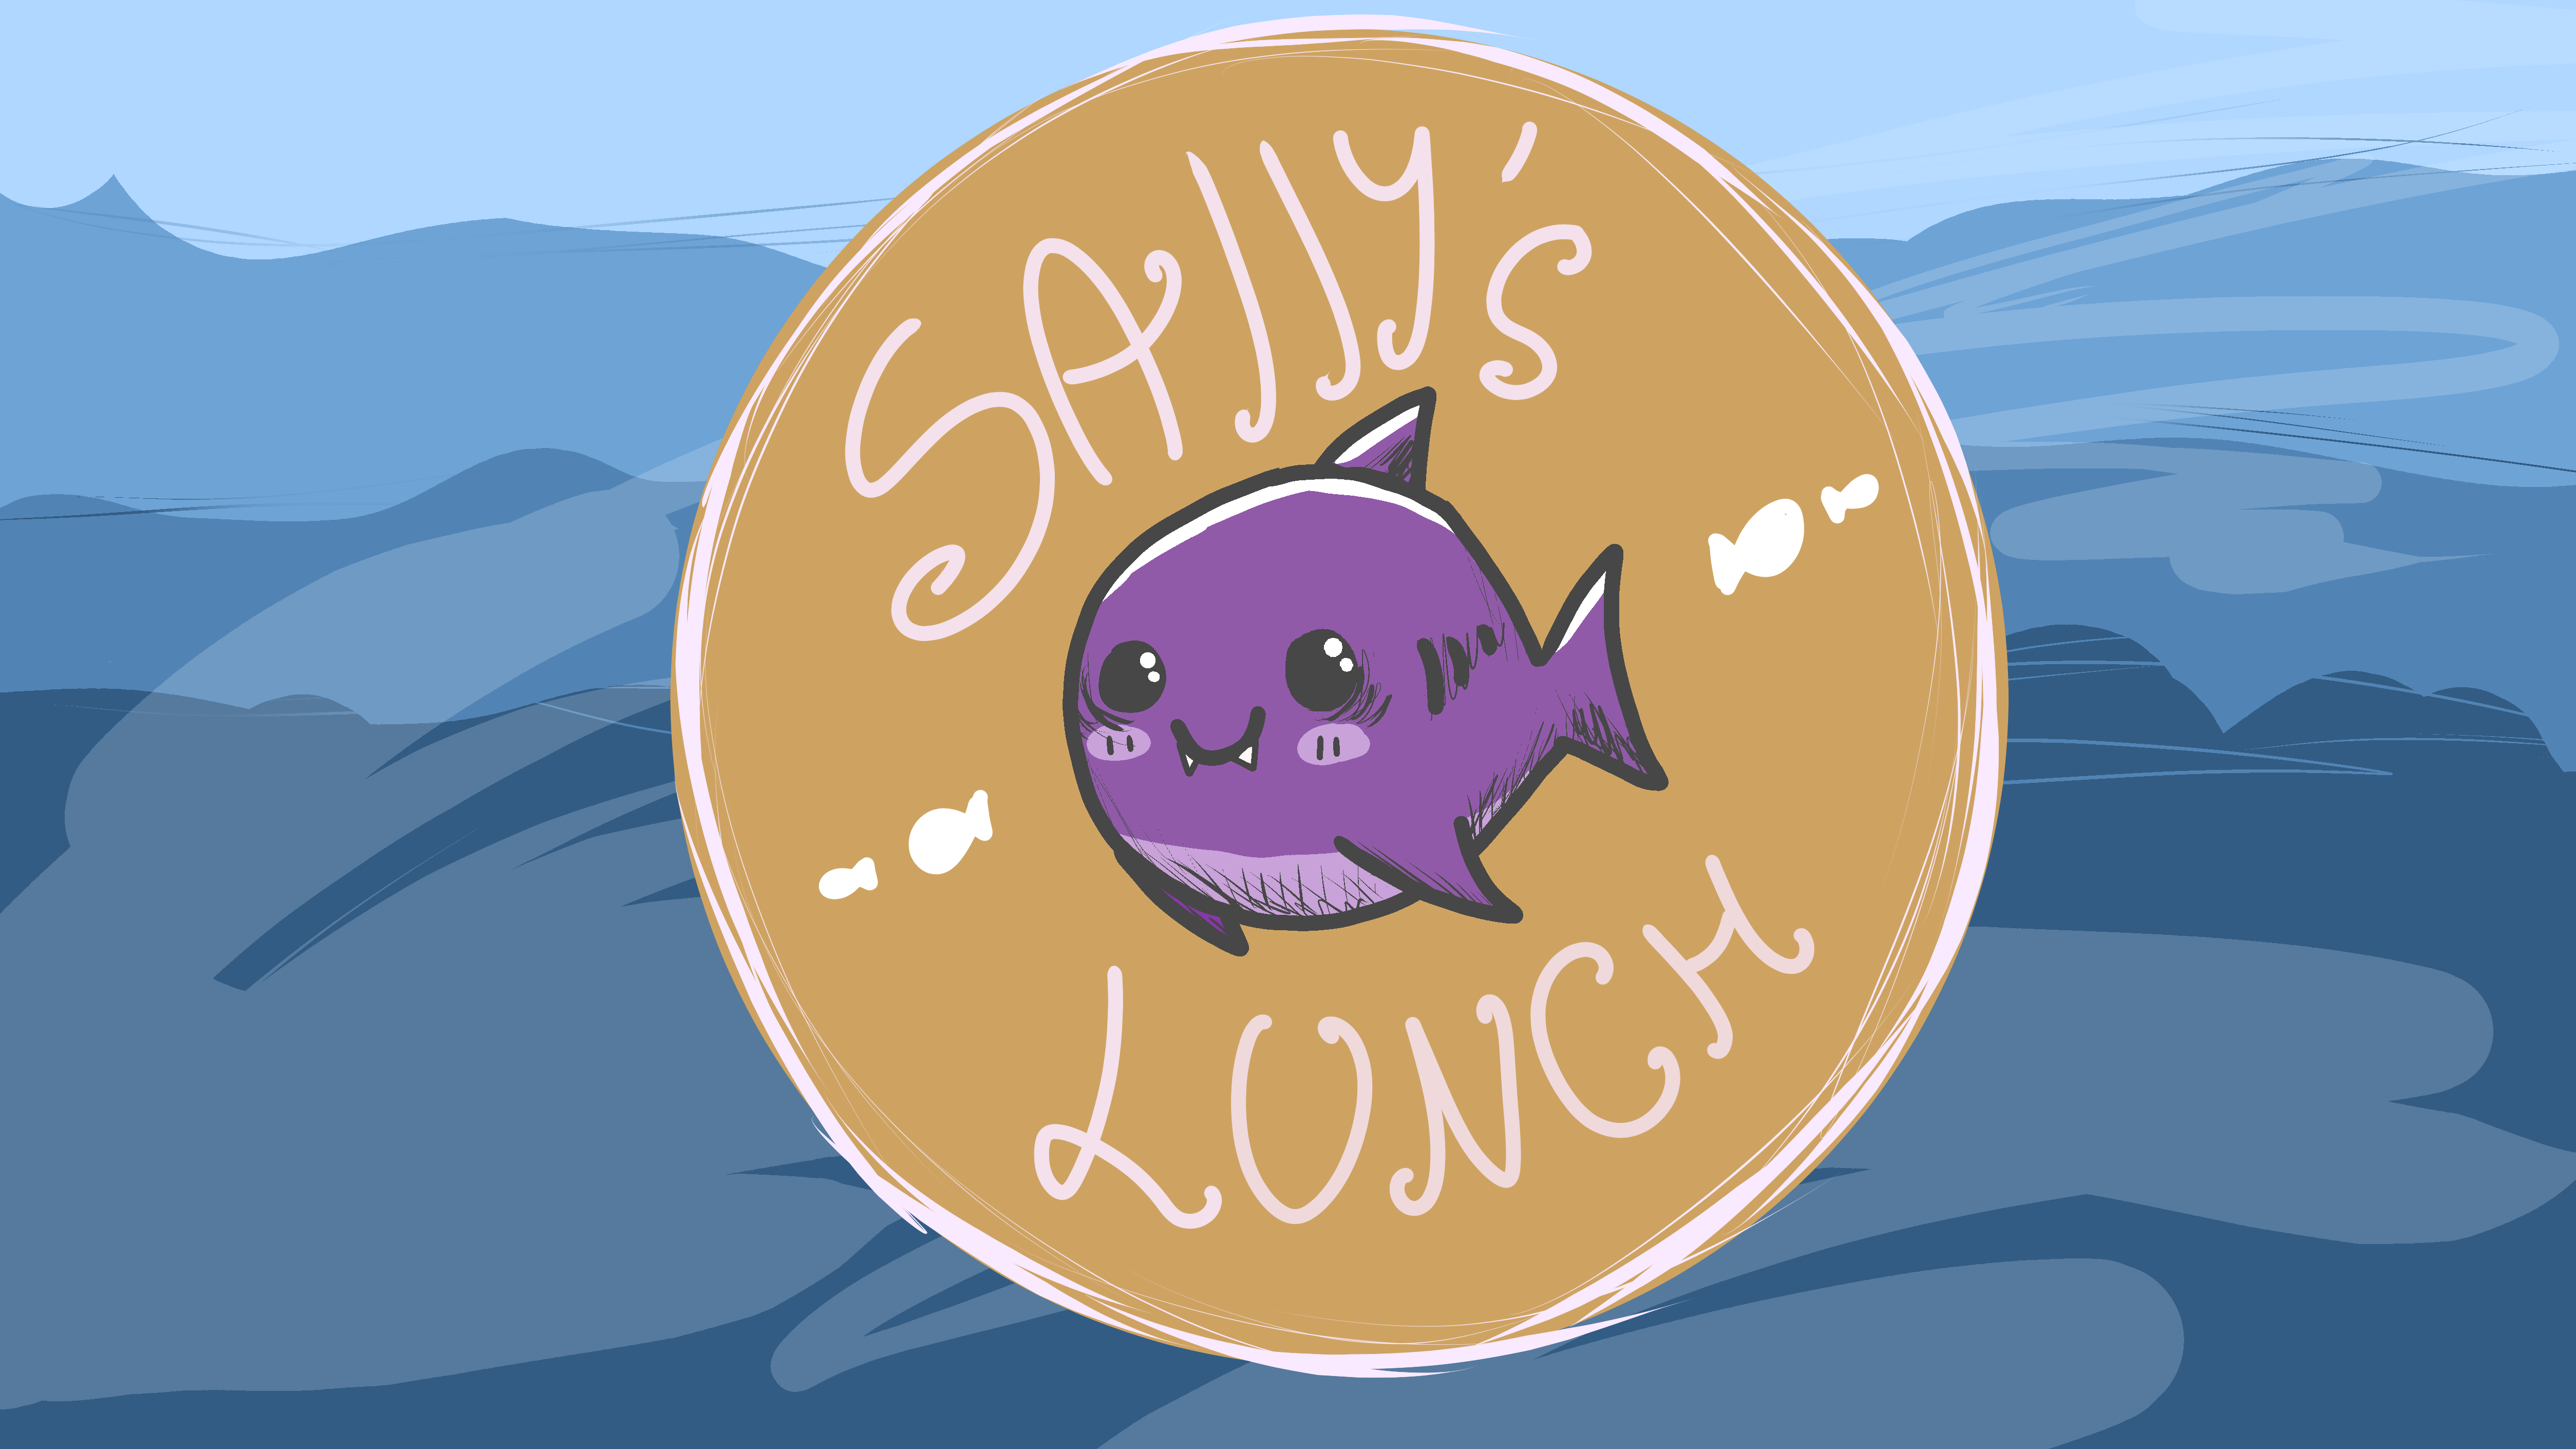 Sally's Lunch